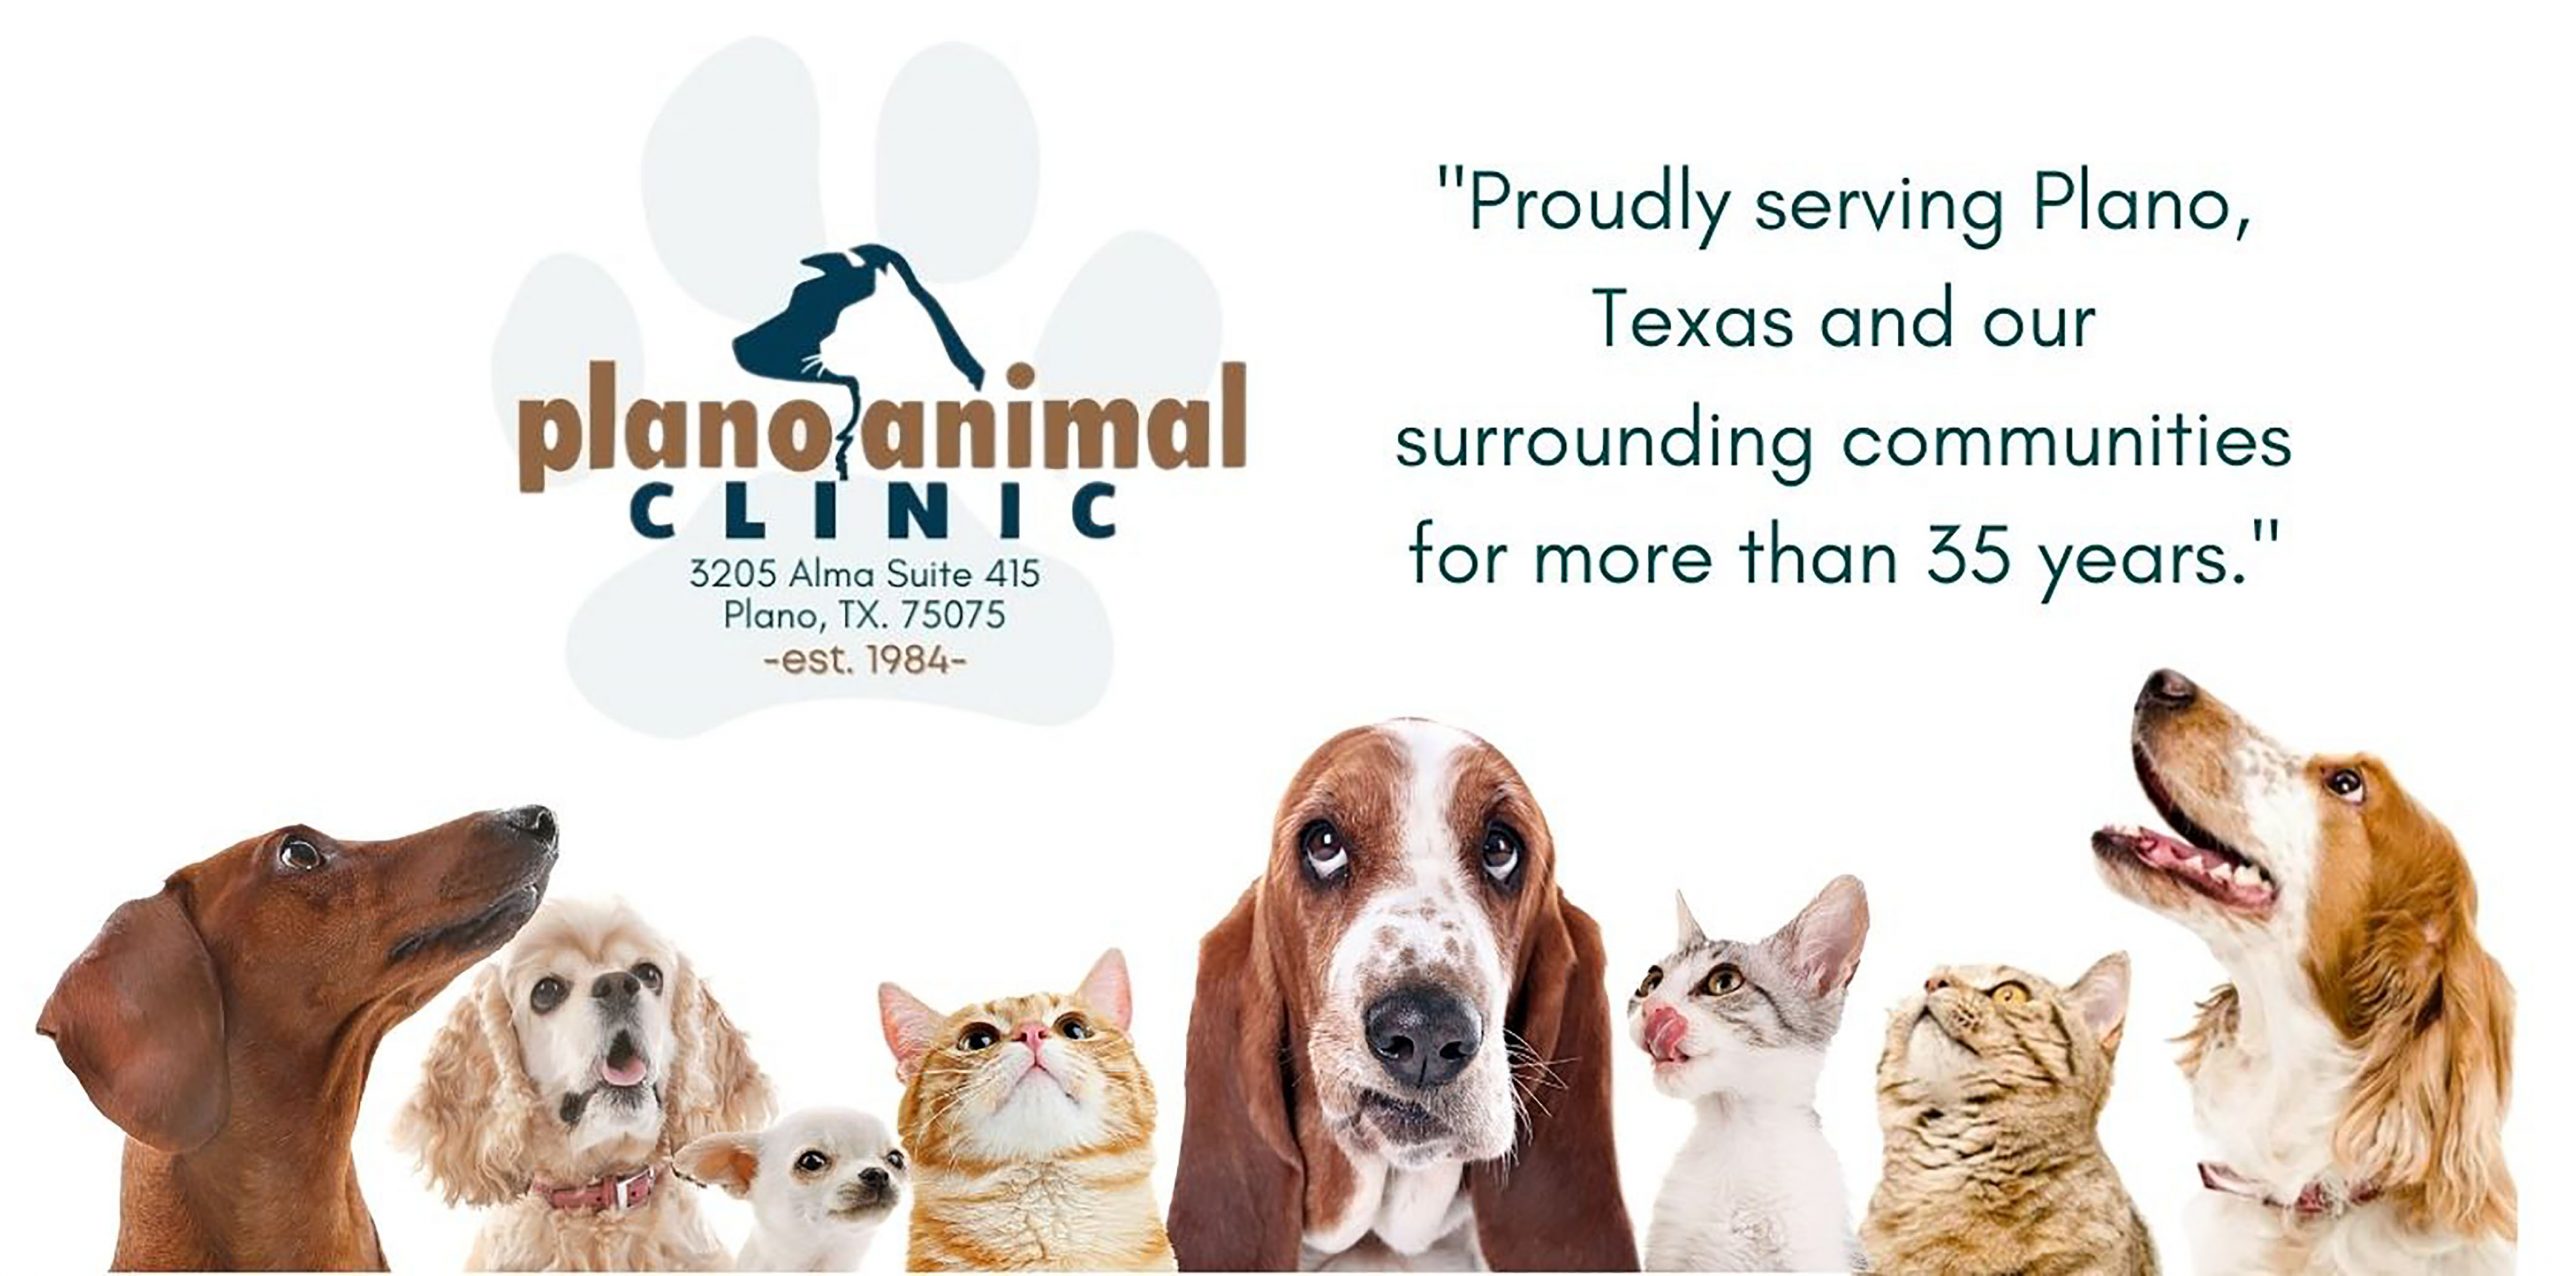 Plano Animal Clinic – Caring for your animals